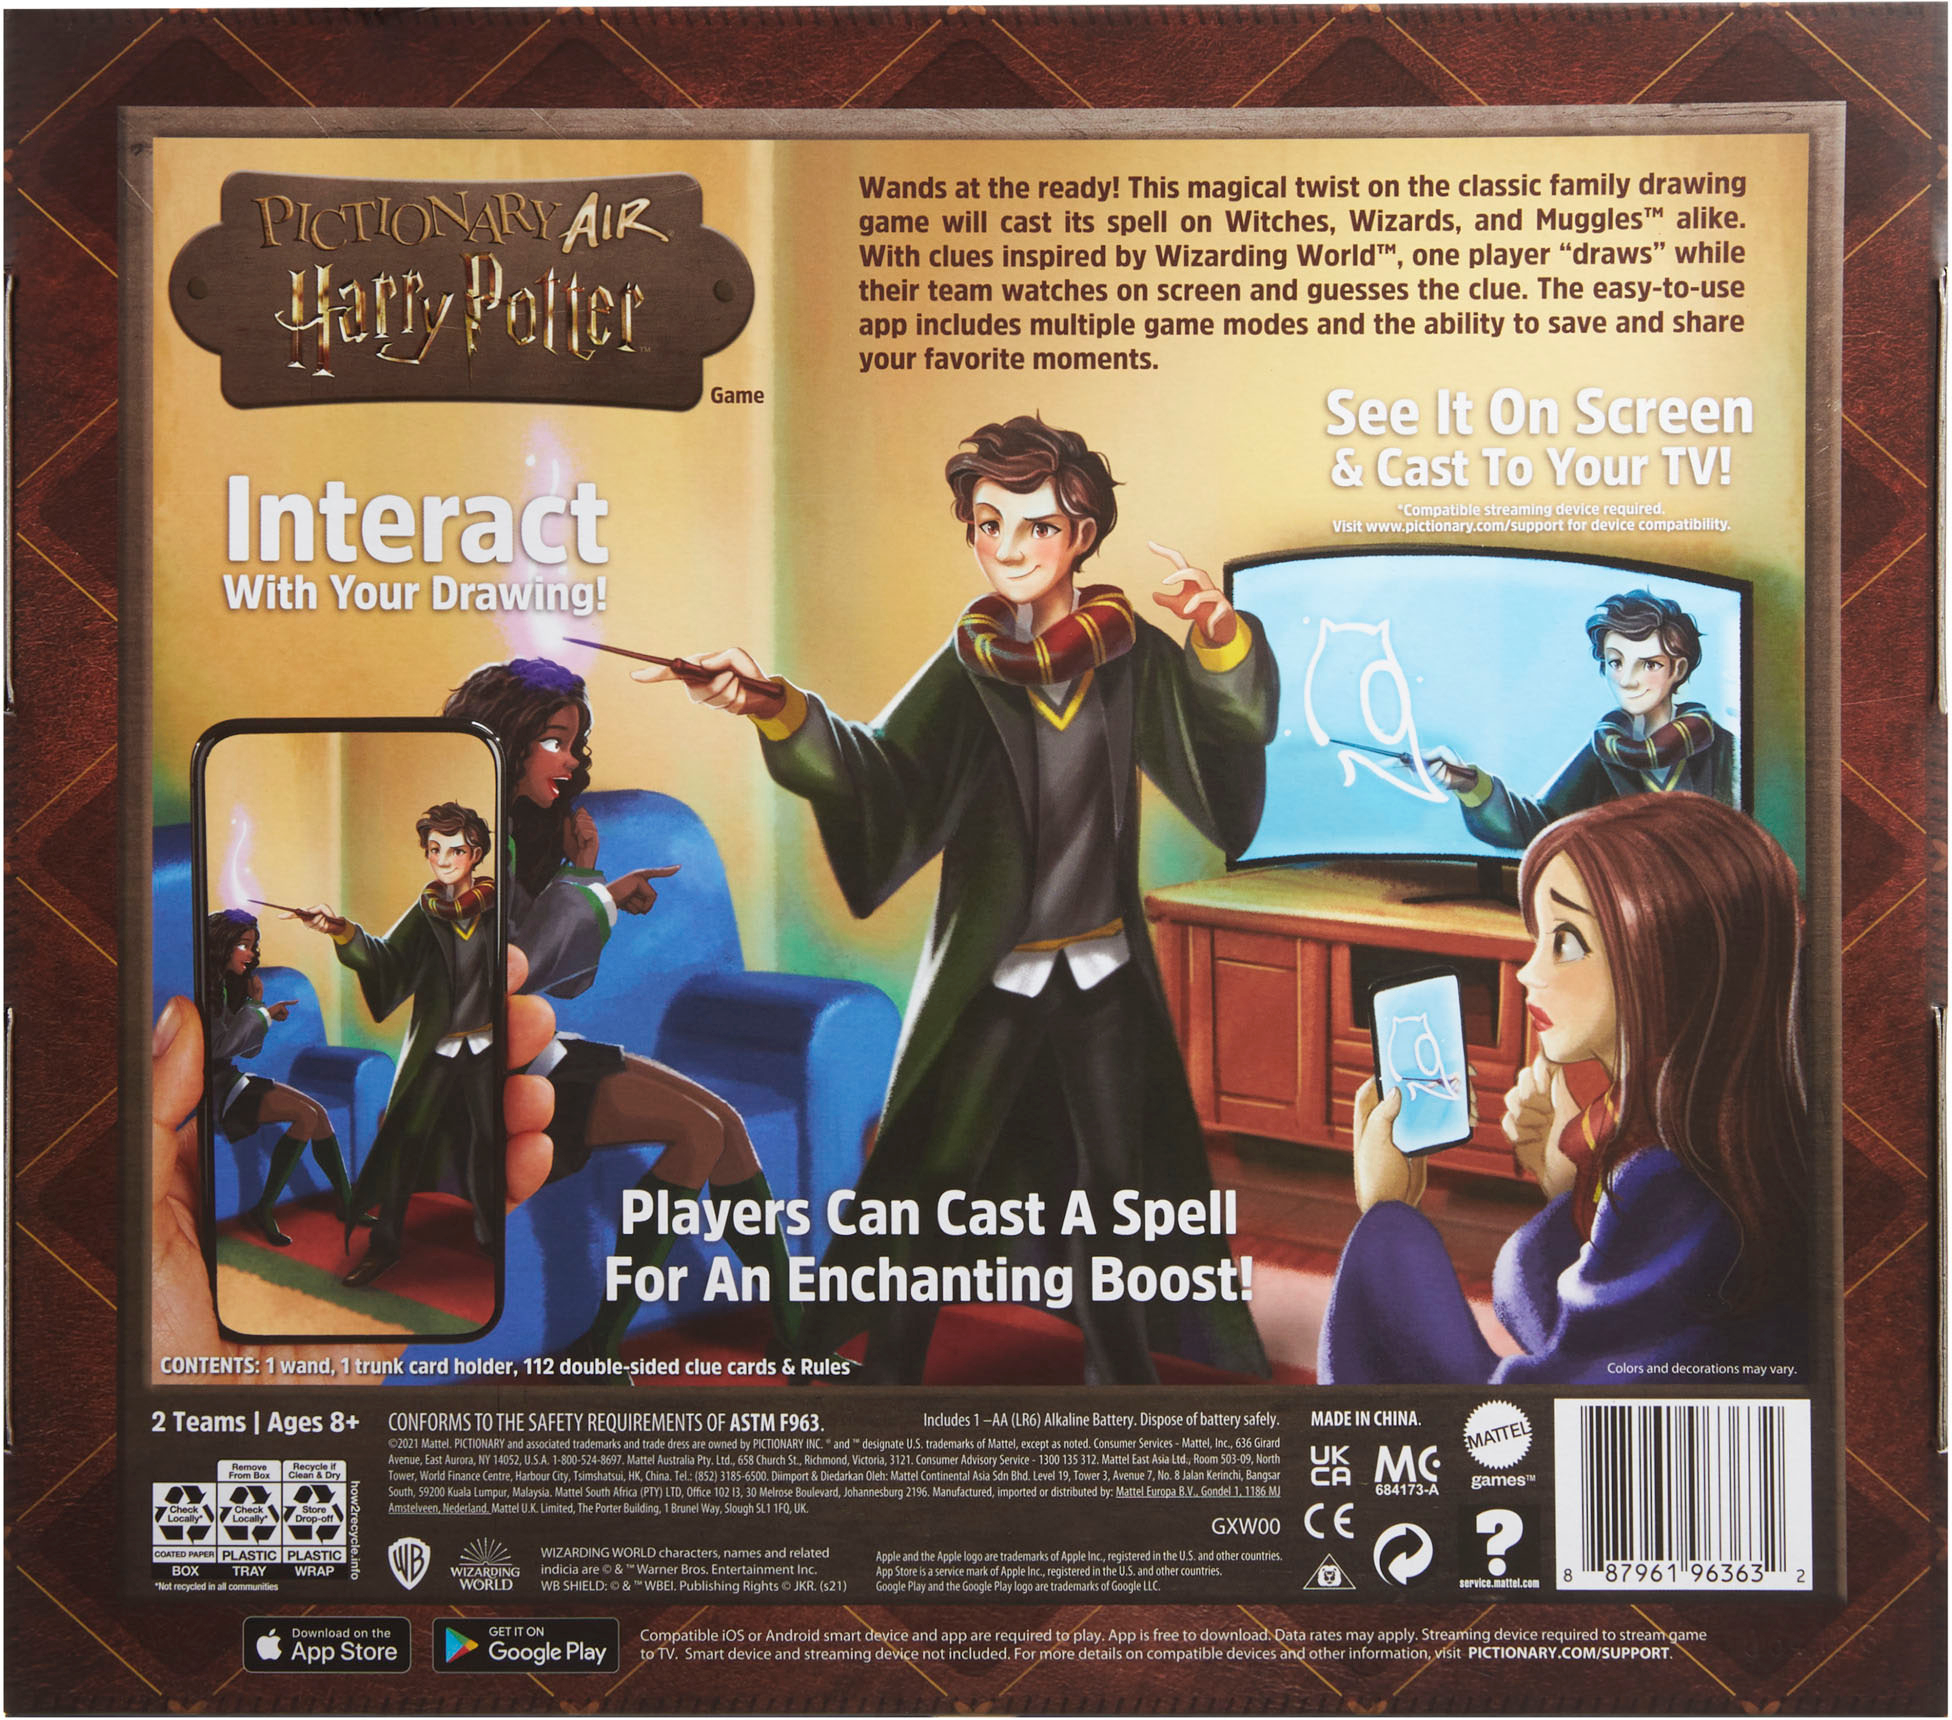 Potter Best Air Harry - GXW00 Buy Pictionary